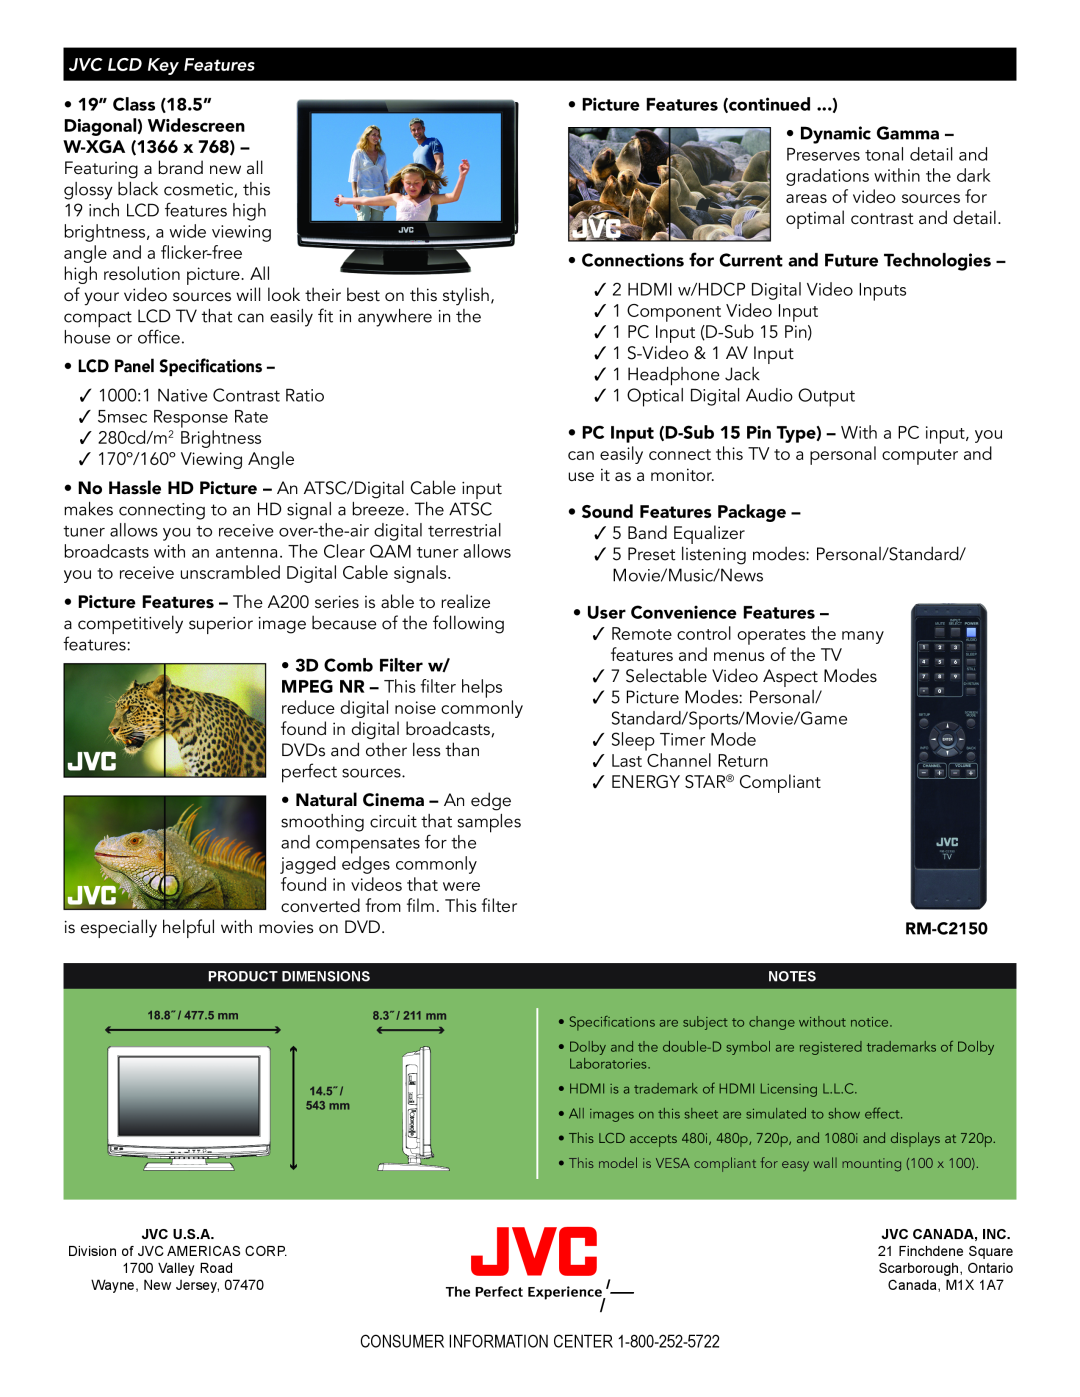 JVC LT-19A200 manual JVC LCD Key Features, LCD Panel Specifications 